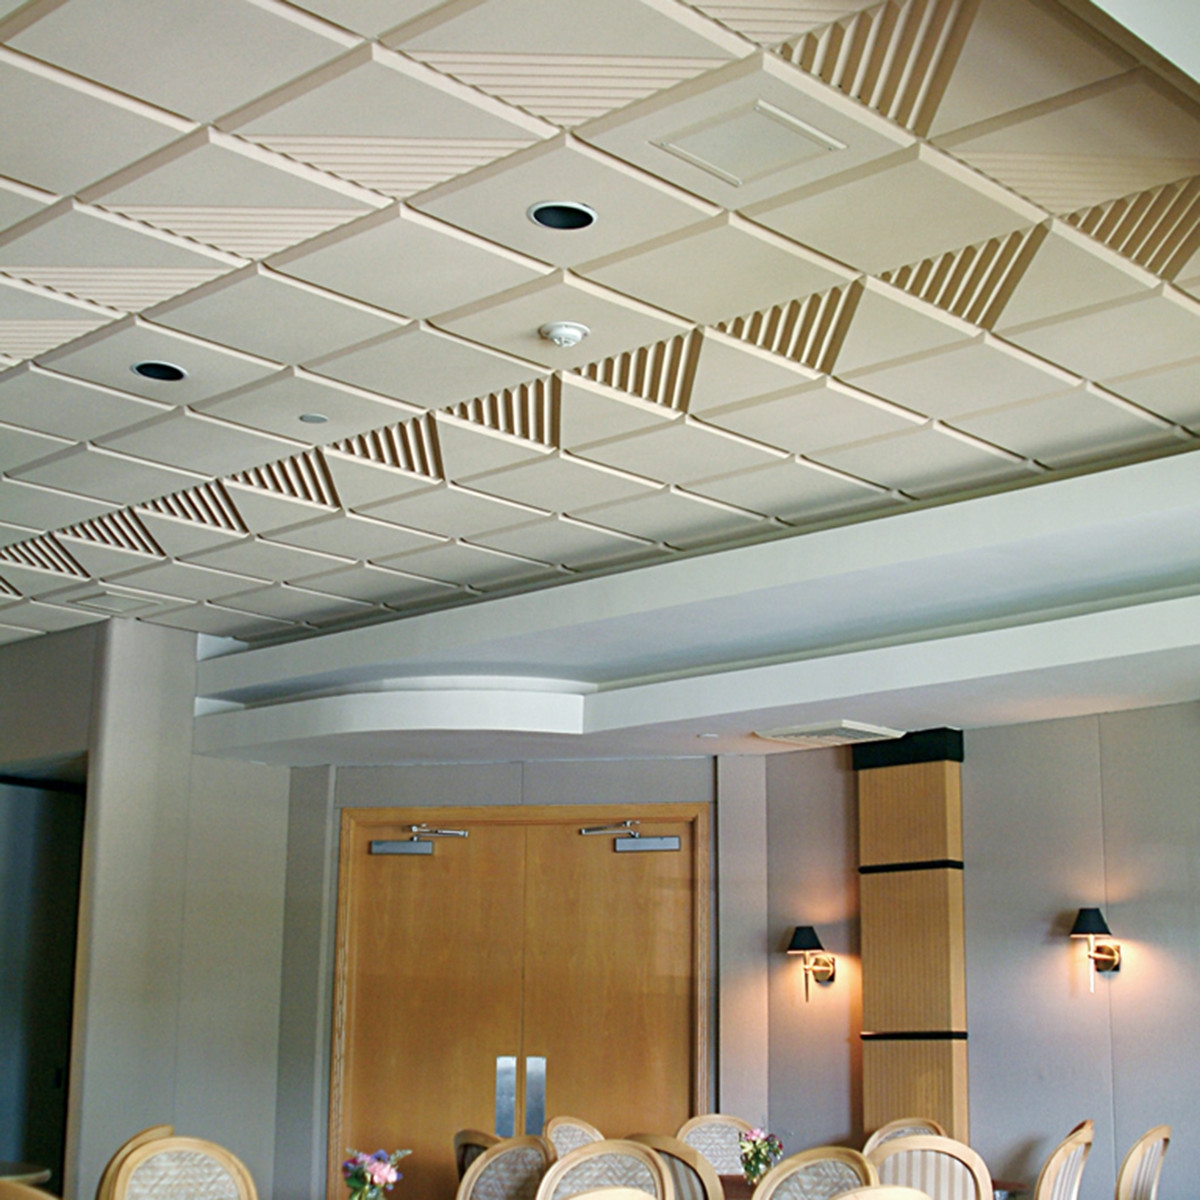 Glue On Soundproof Ceiling Tiles Glue On Soundproof Ceiling Tiles sonex contour ceiling tile acoustical solutions 1200 X 1200